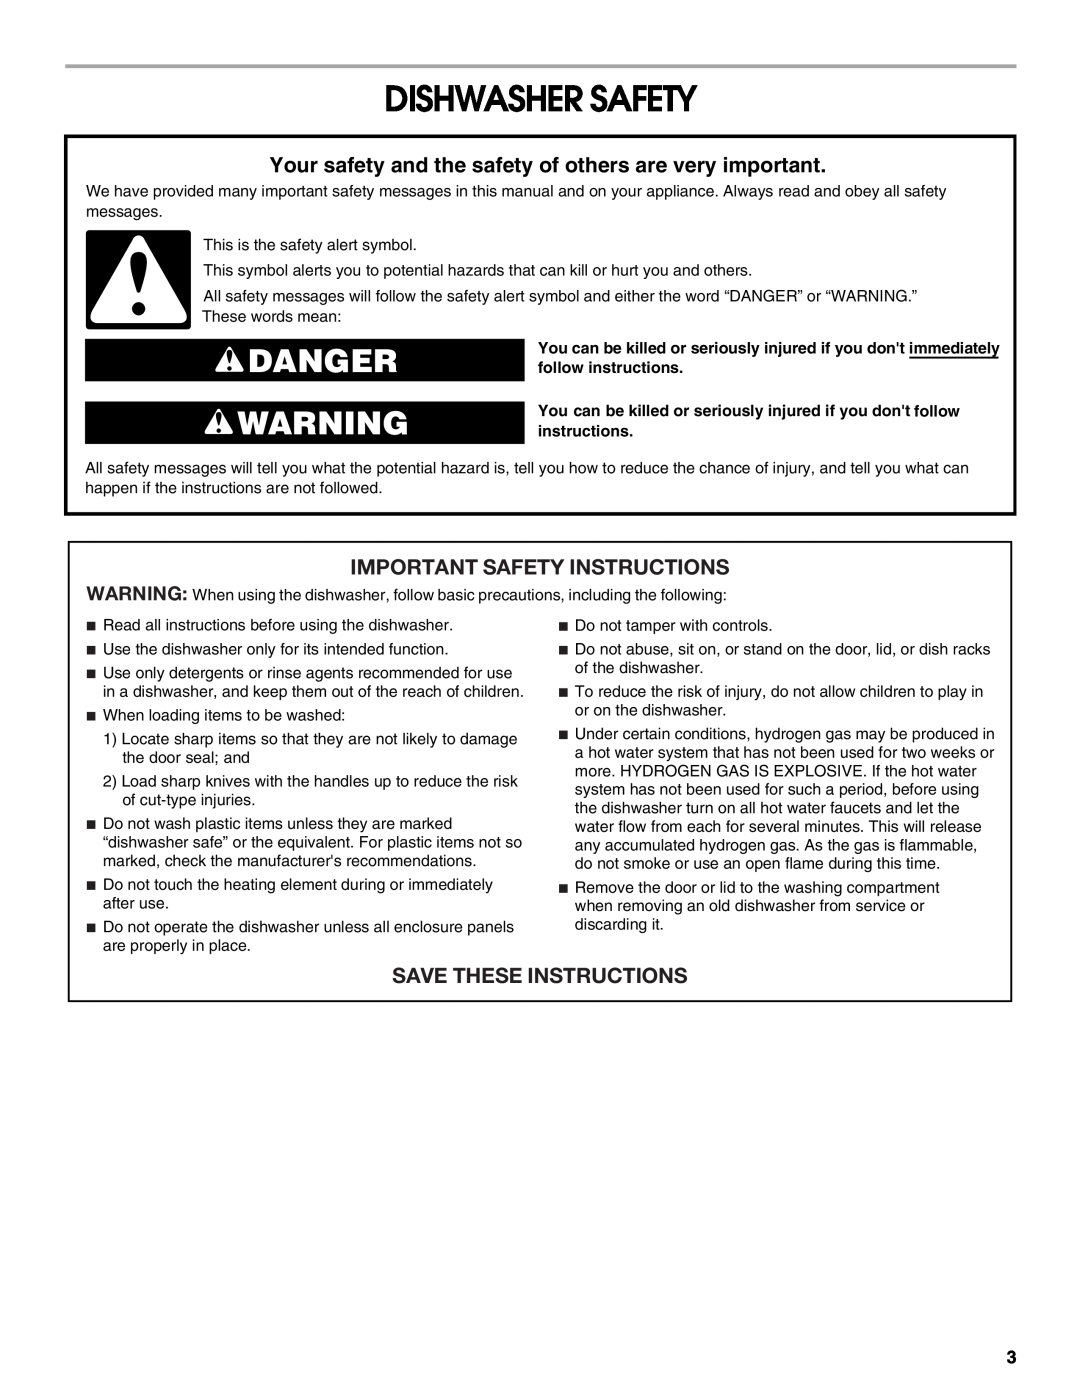 Estate TUD8750S manual Dishwasher Safety, Important Safety Instructions, Save These Instructions, Danger 